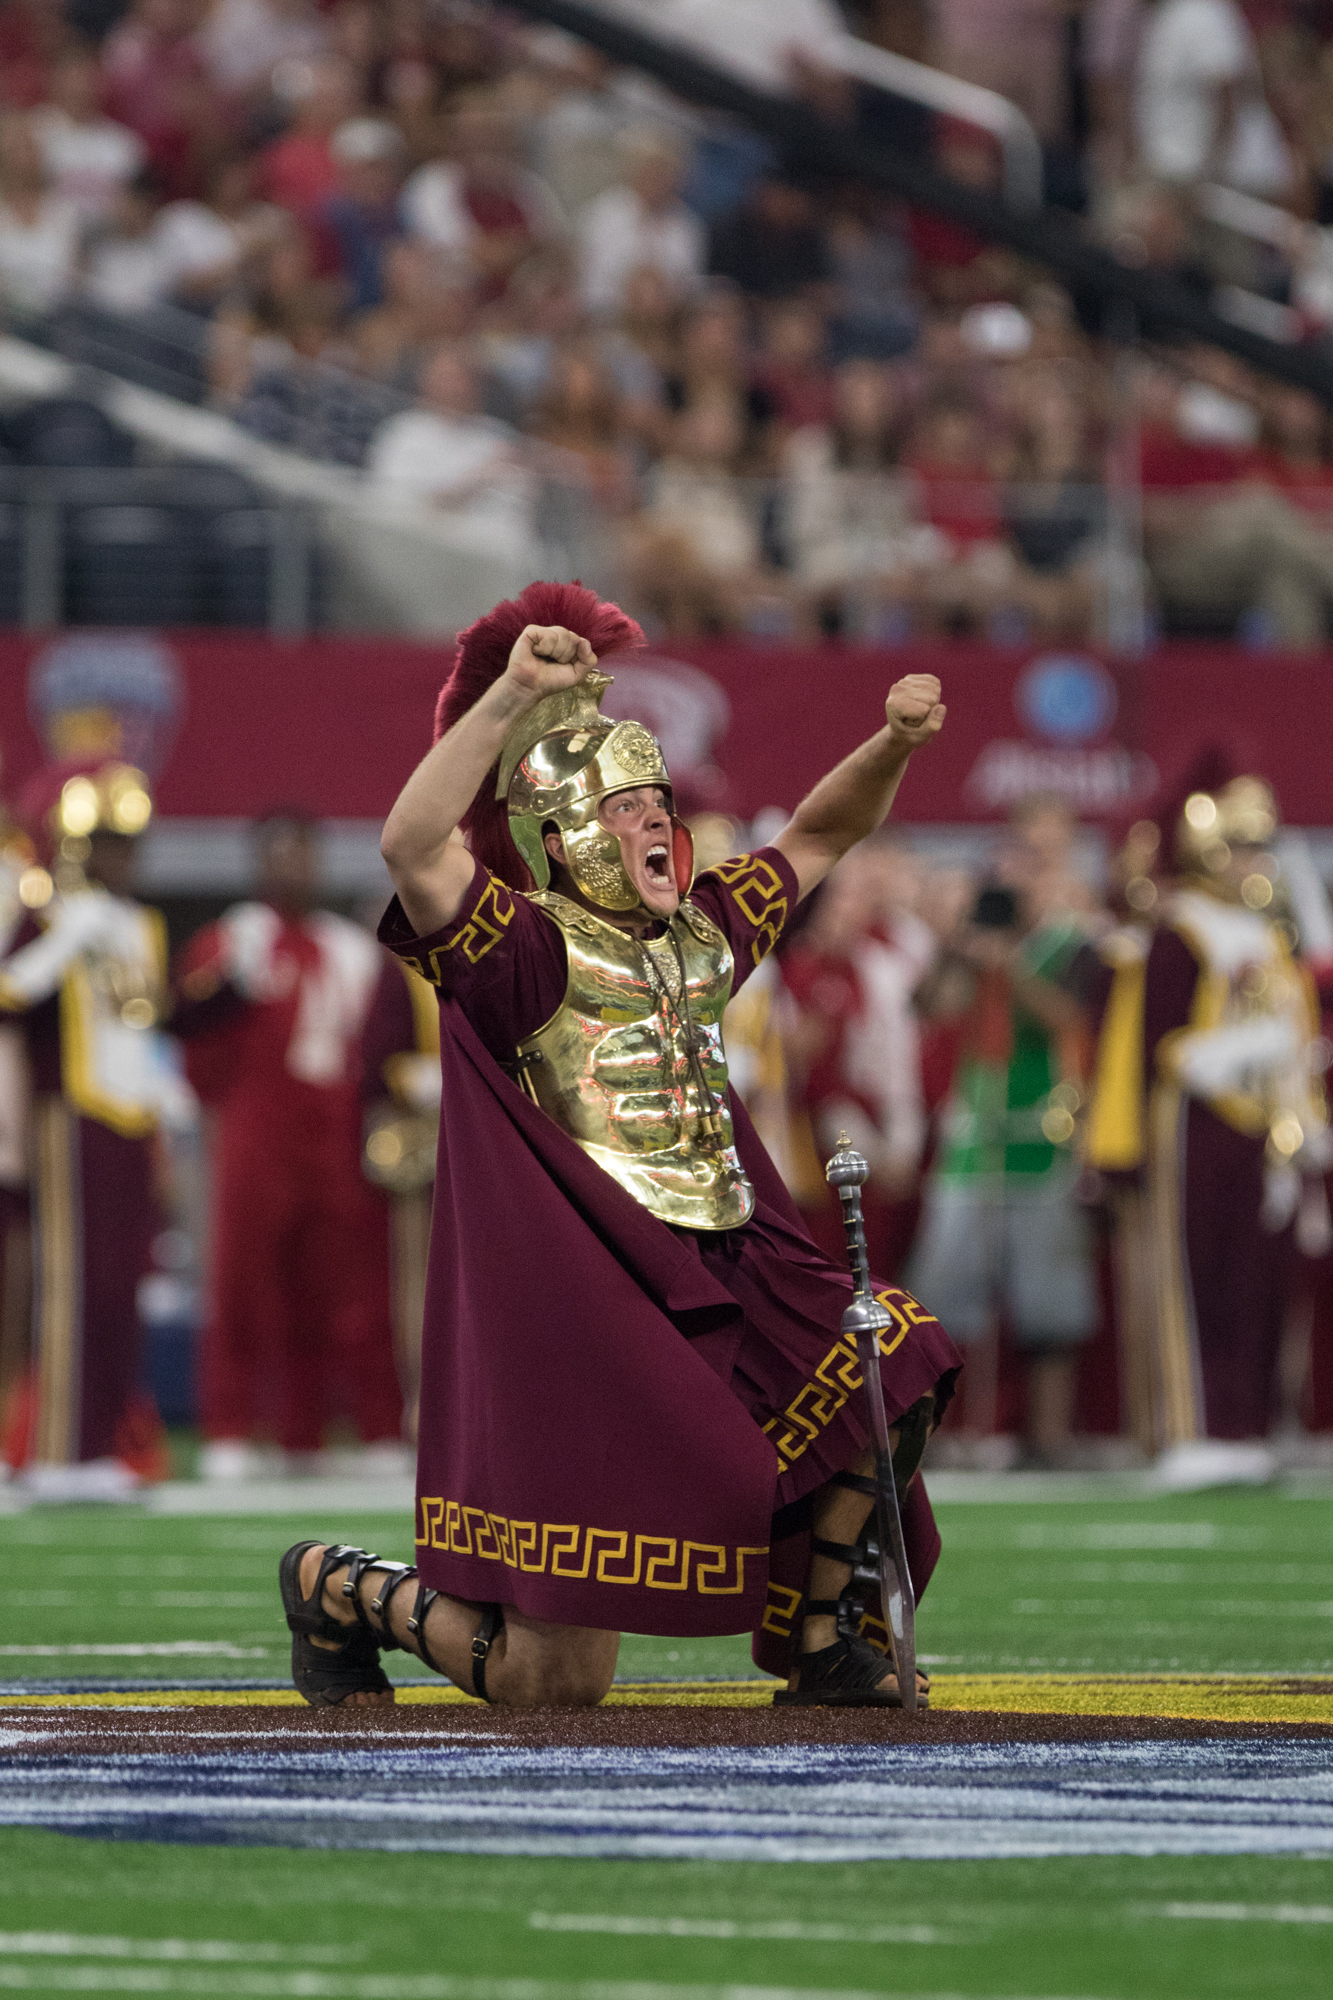 The Spirit of Troy Marching Band was led onto the field before the game by the drum major who started things off in his usual fashion — a sword in the ground.